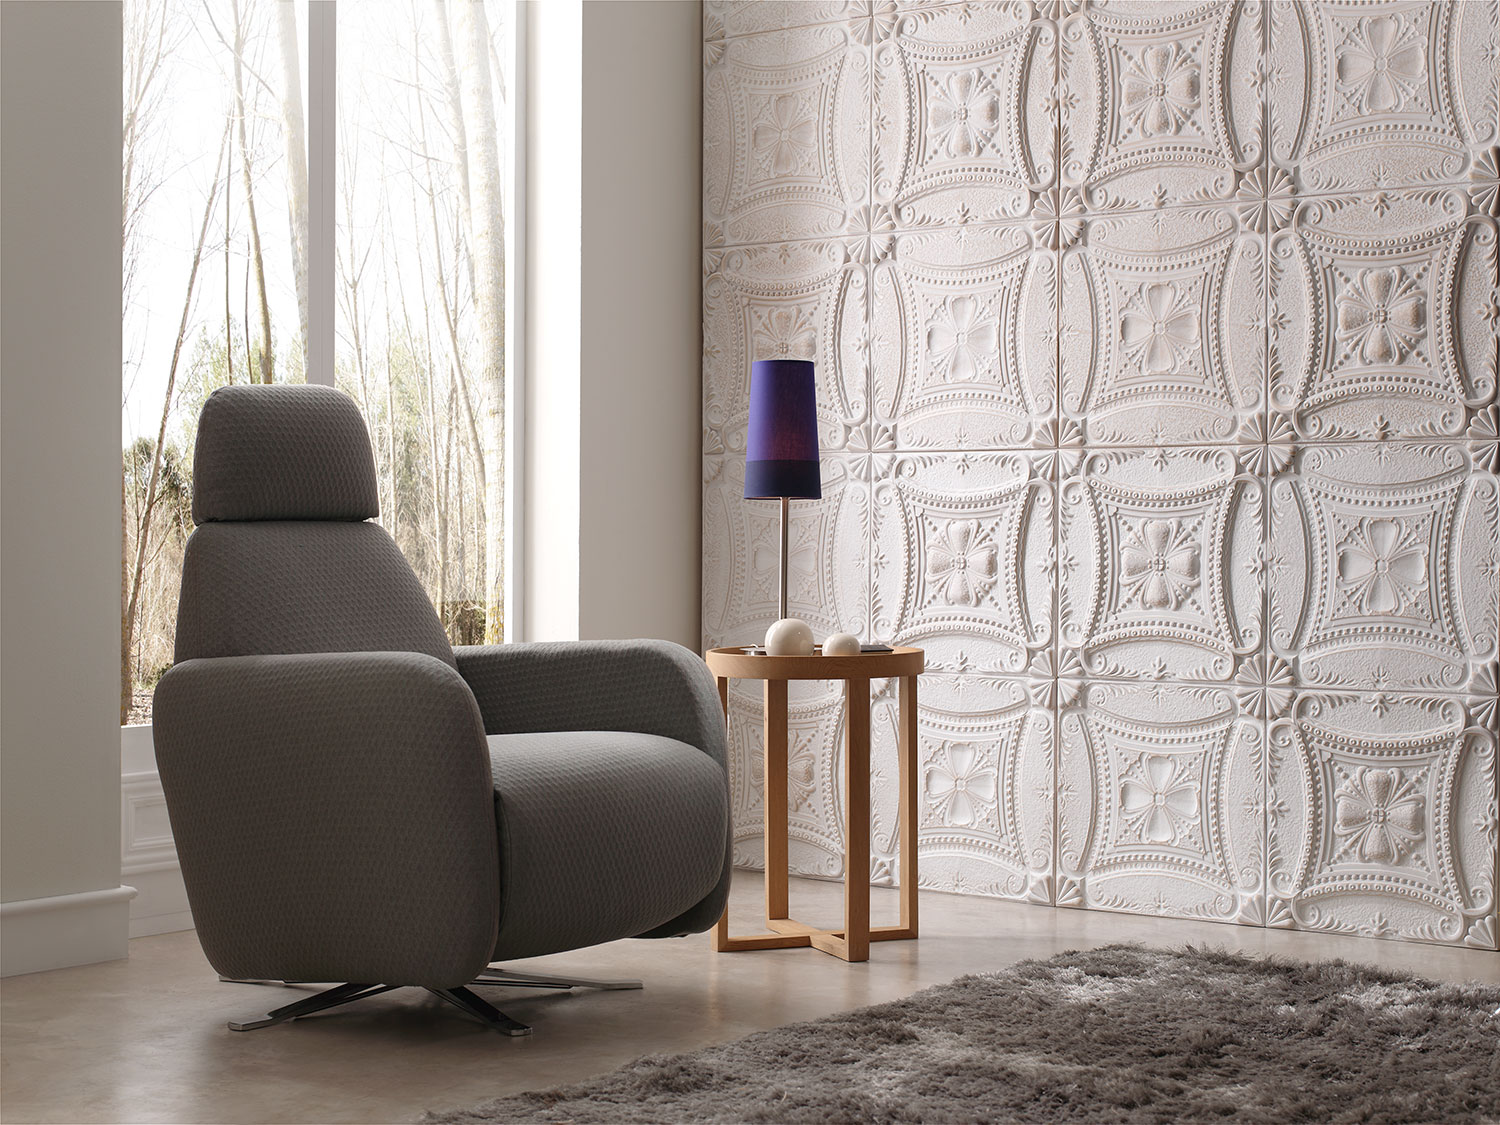 panel piedra decorative wall next to grey chair and wooden circular side table